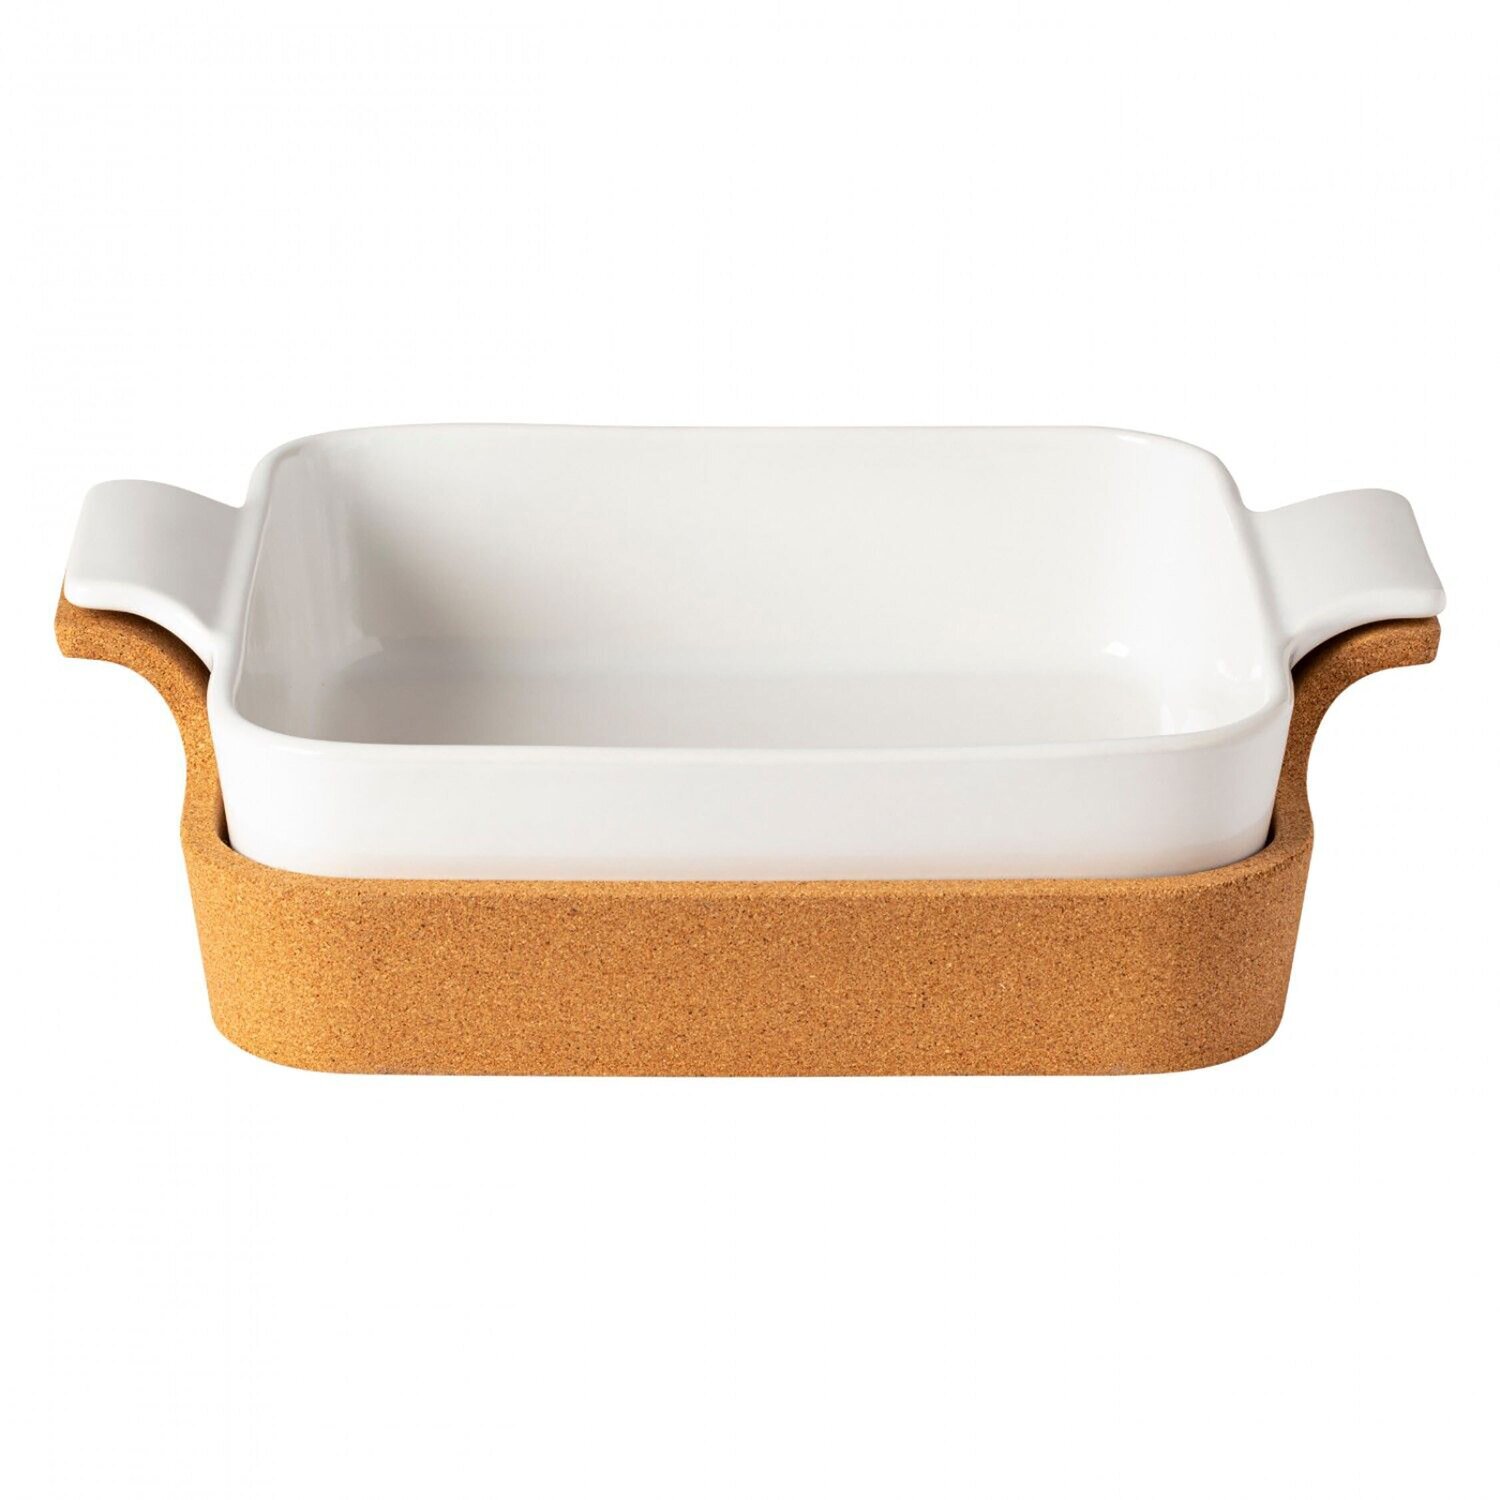 Casafina Ensemble Gift Square Baker with Cork Tray White DQ321-WHI